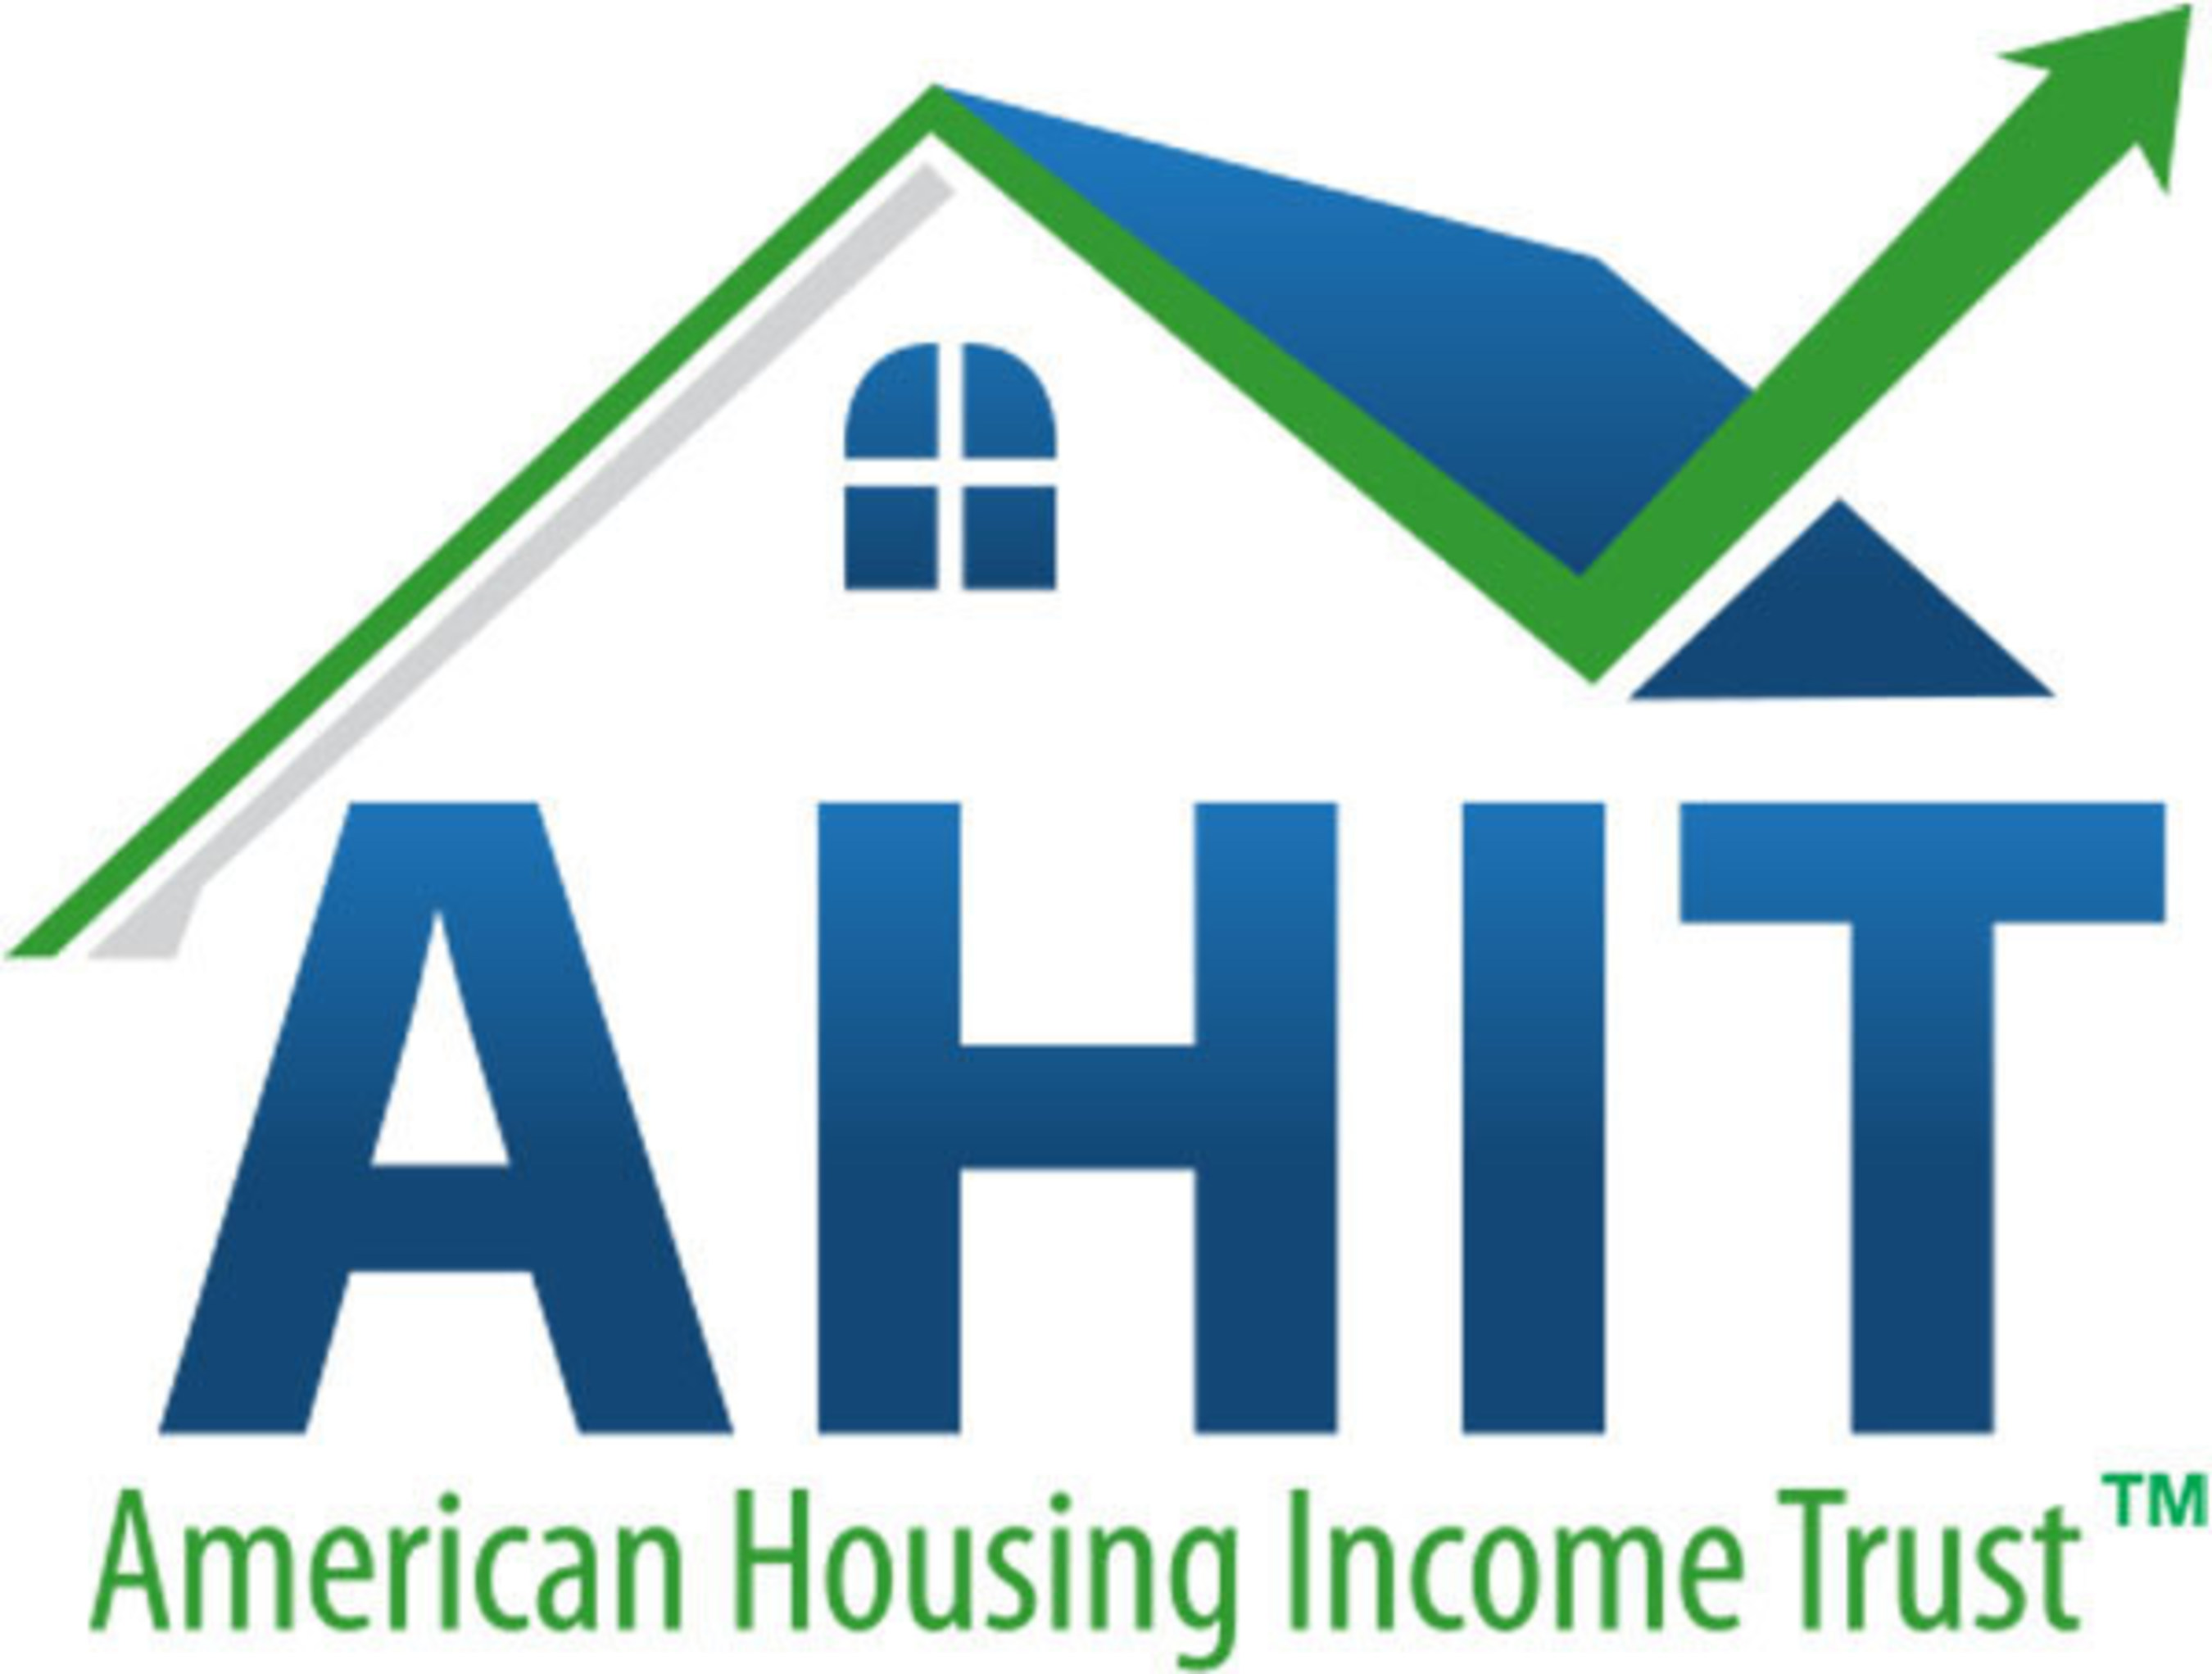 American Housing Income Trust